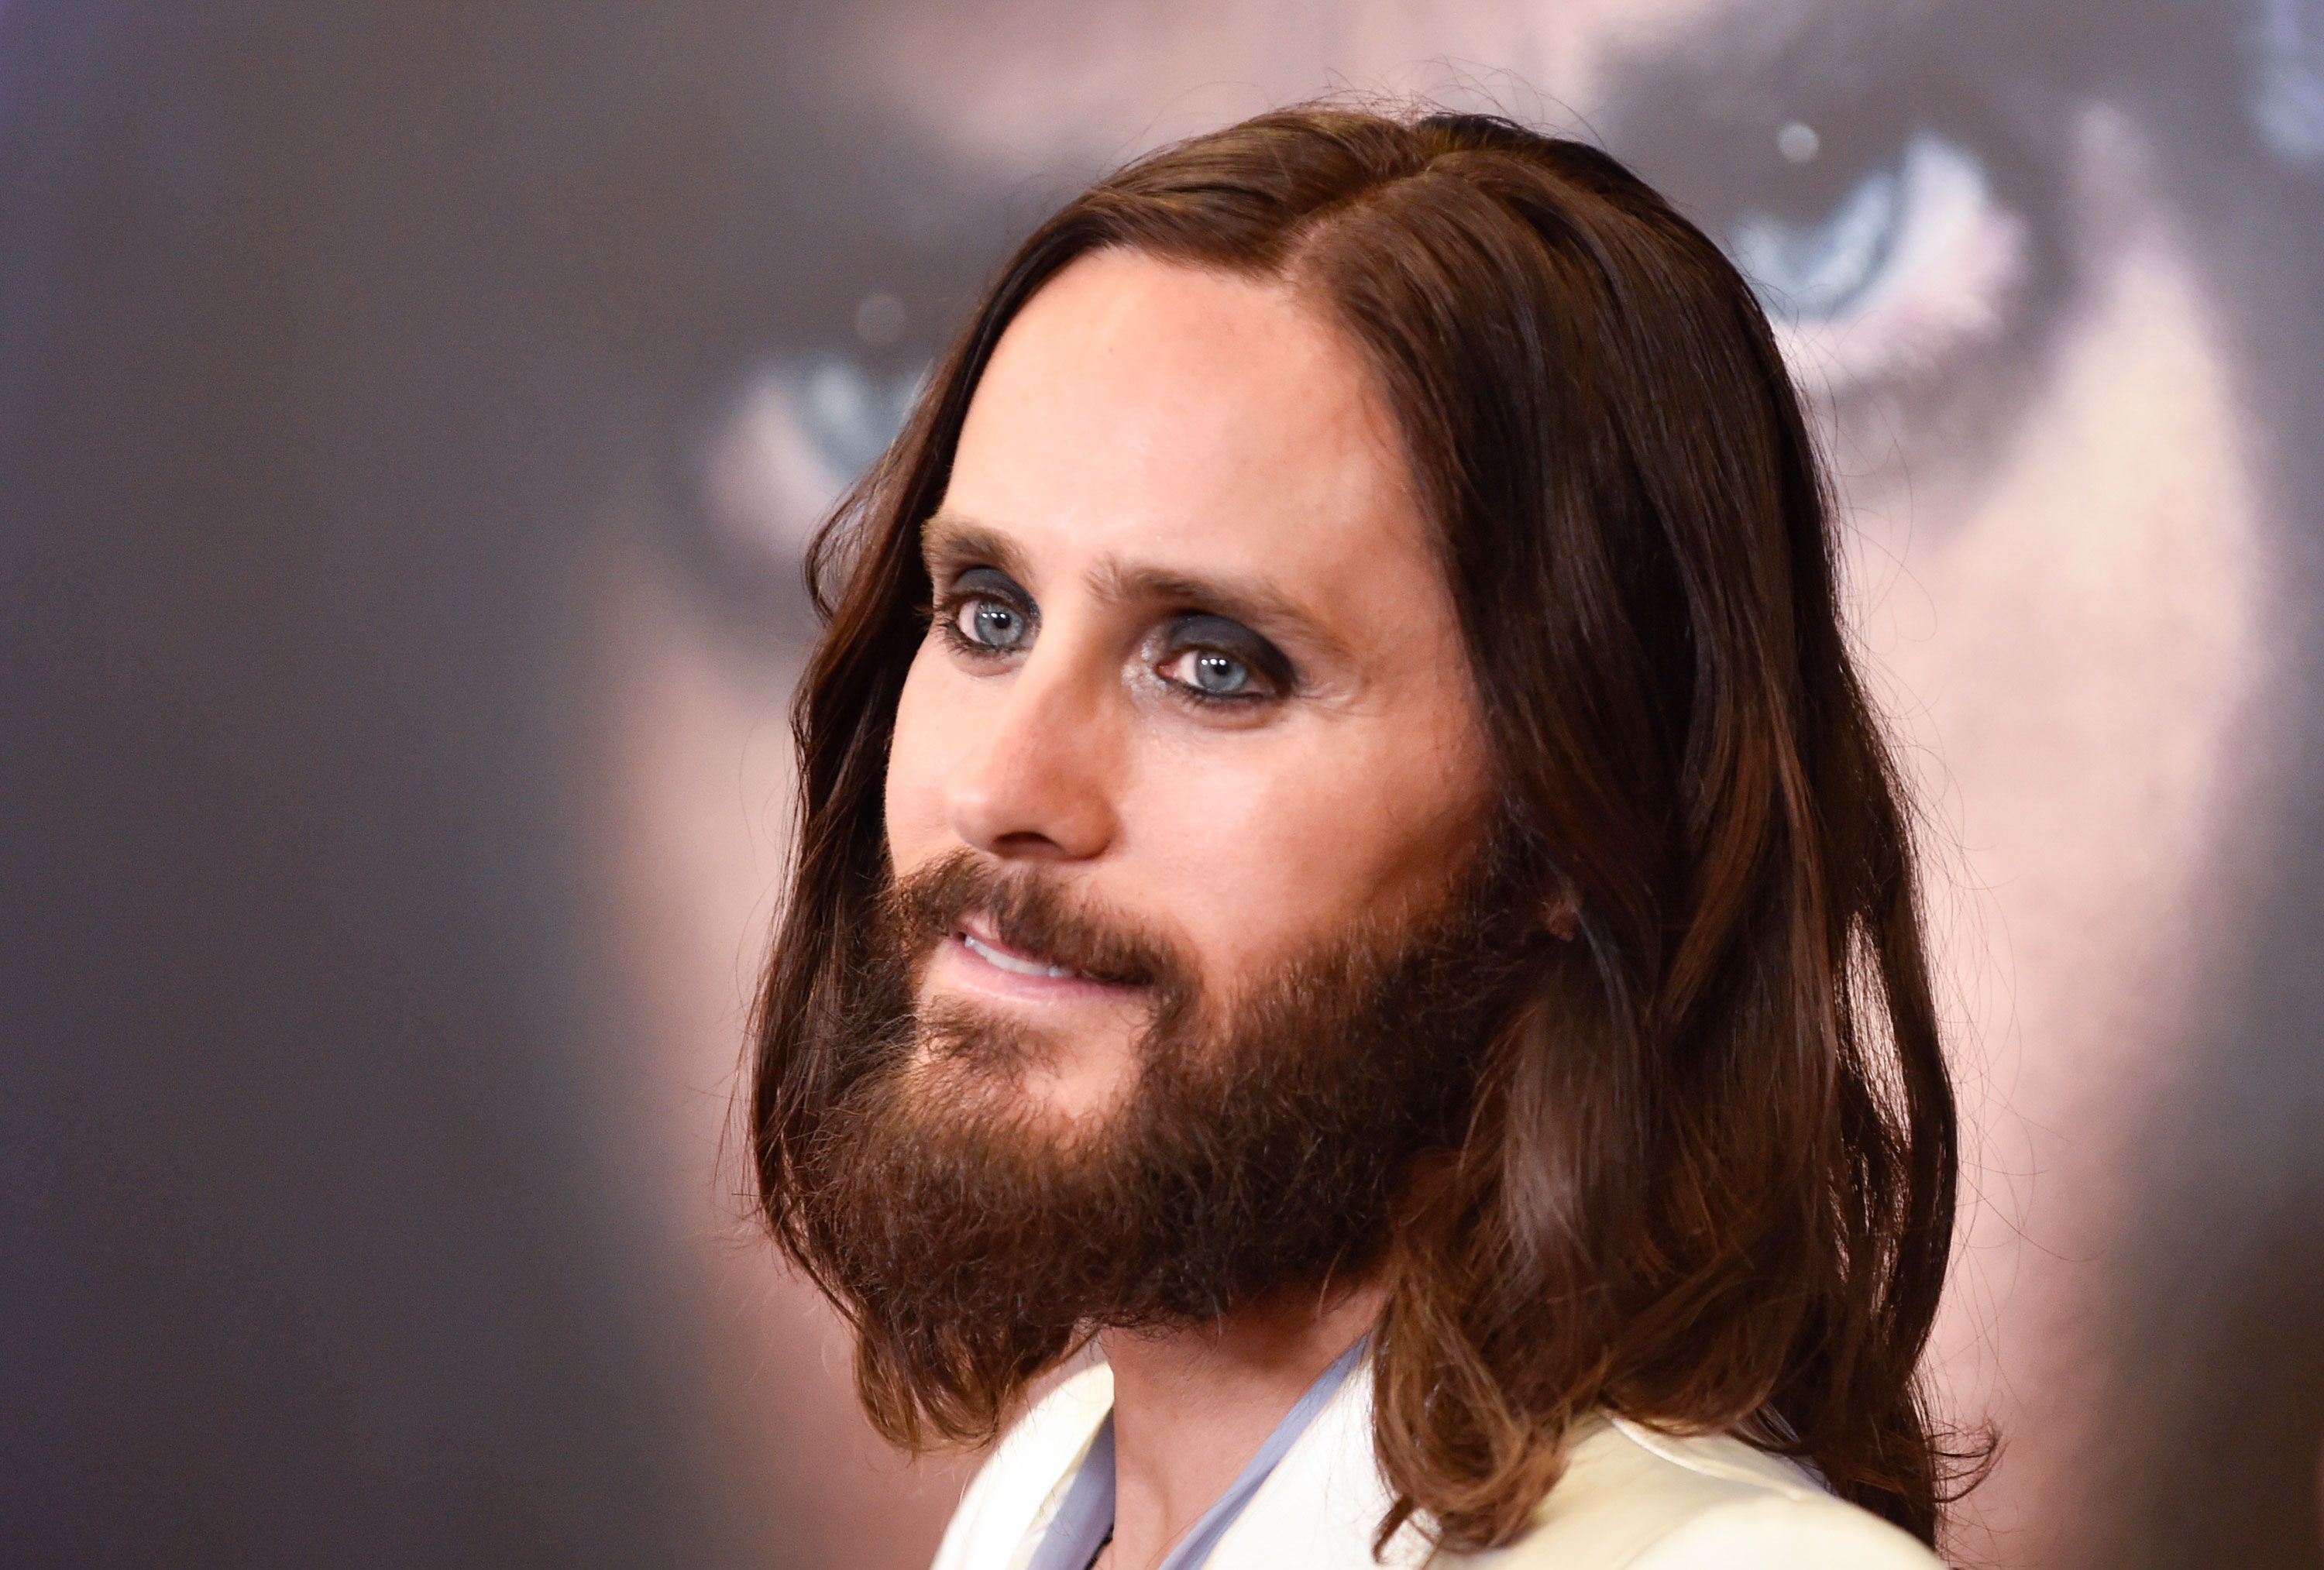 Who is Jared Leto dating